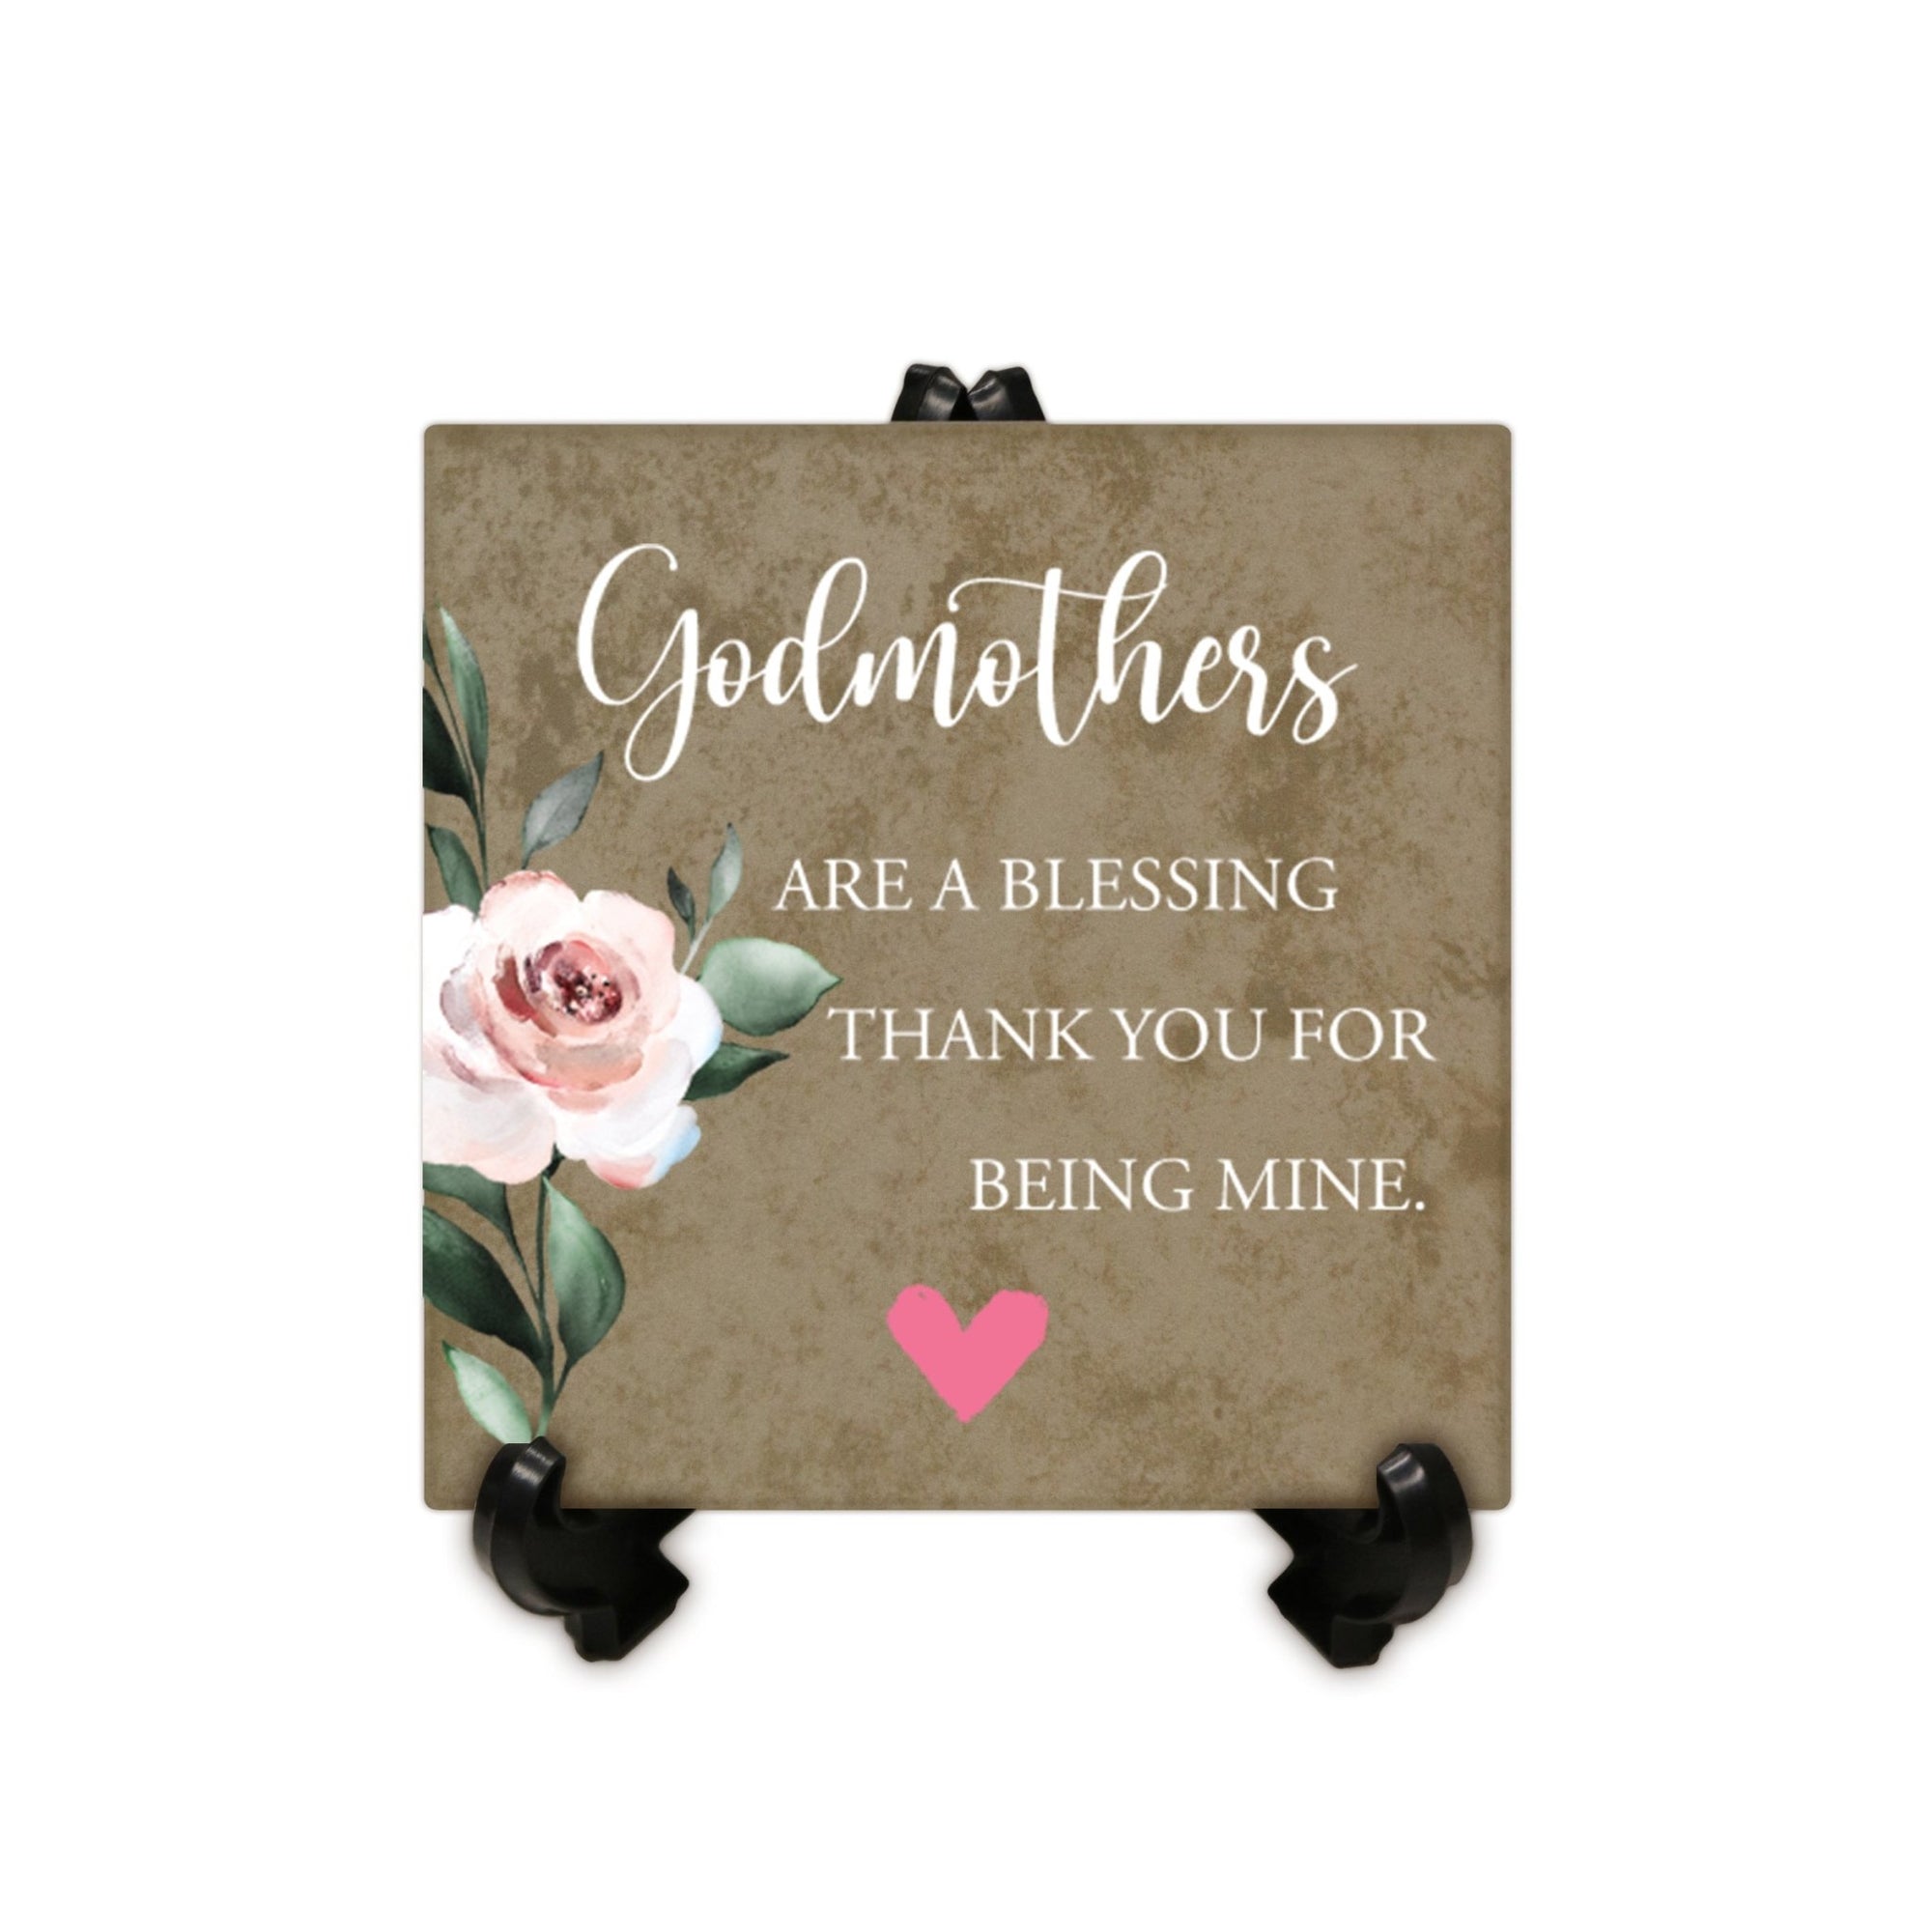 Memorial Ceramic Trivet with Stand for Home Decor - Godmothers - LifeSong Milestones